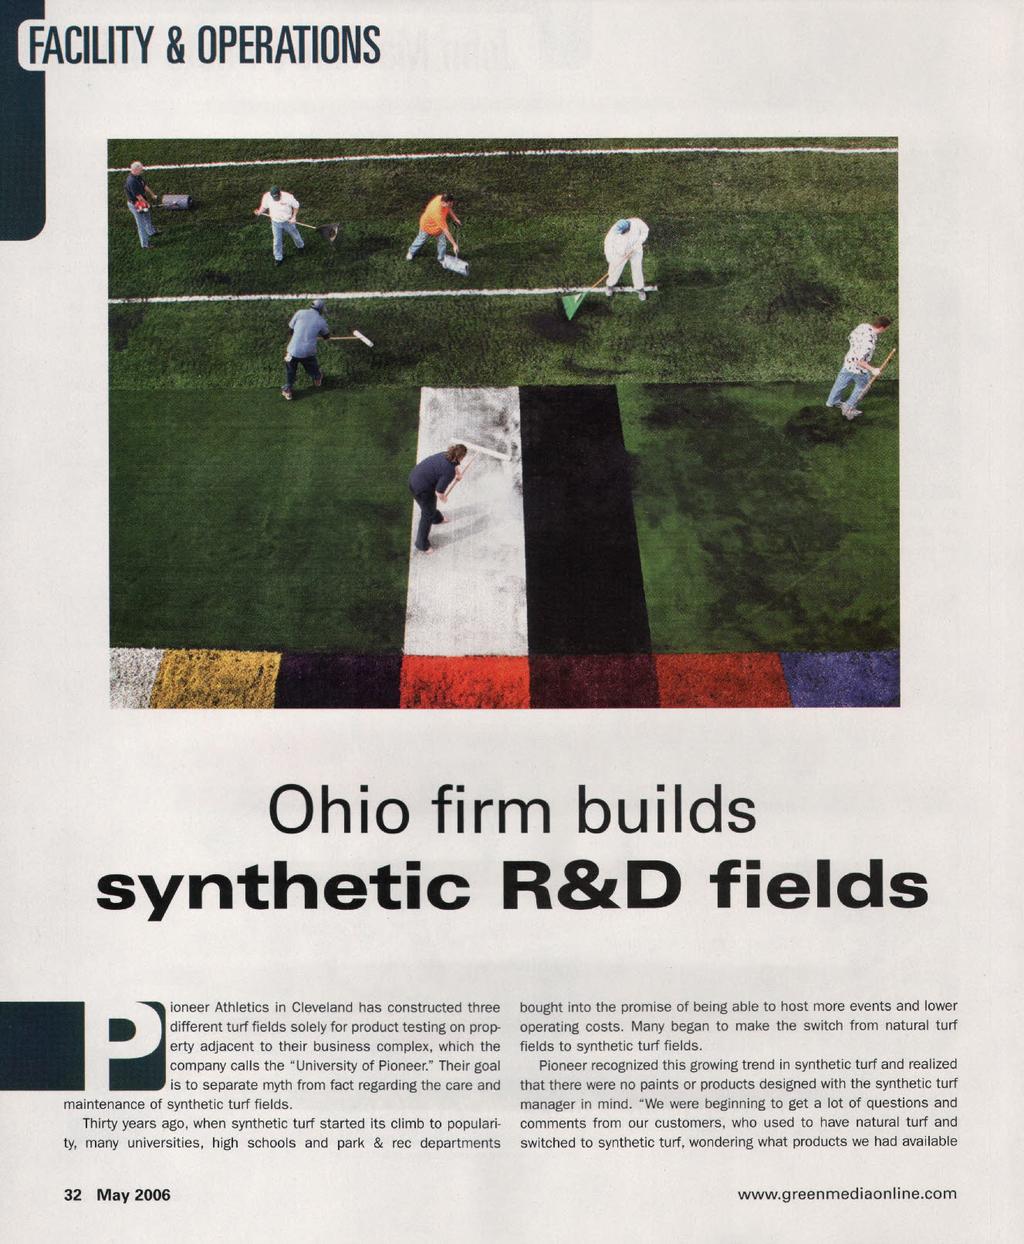 FACILITY & OPERATIONS Ohio firm builds synthetic R&D fields maintenance of synthetic turf fields.